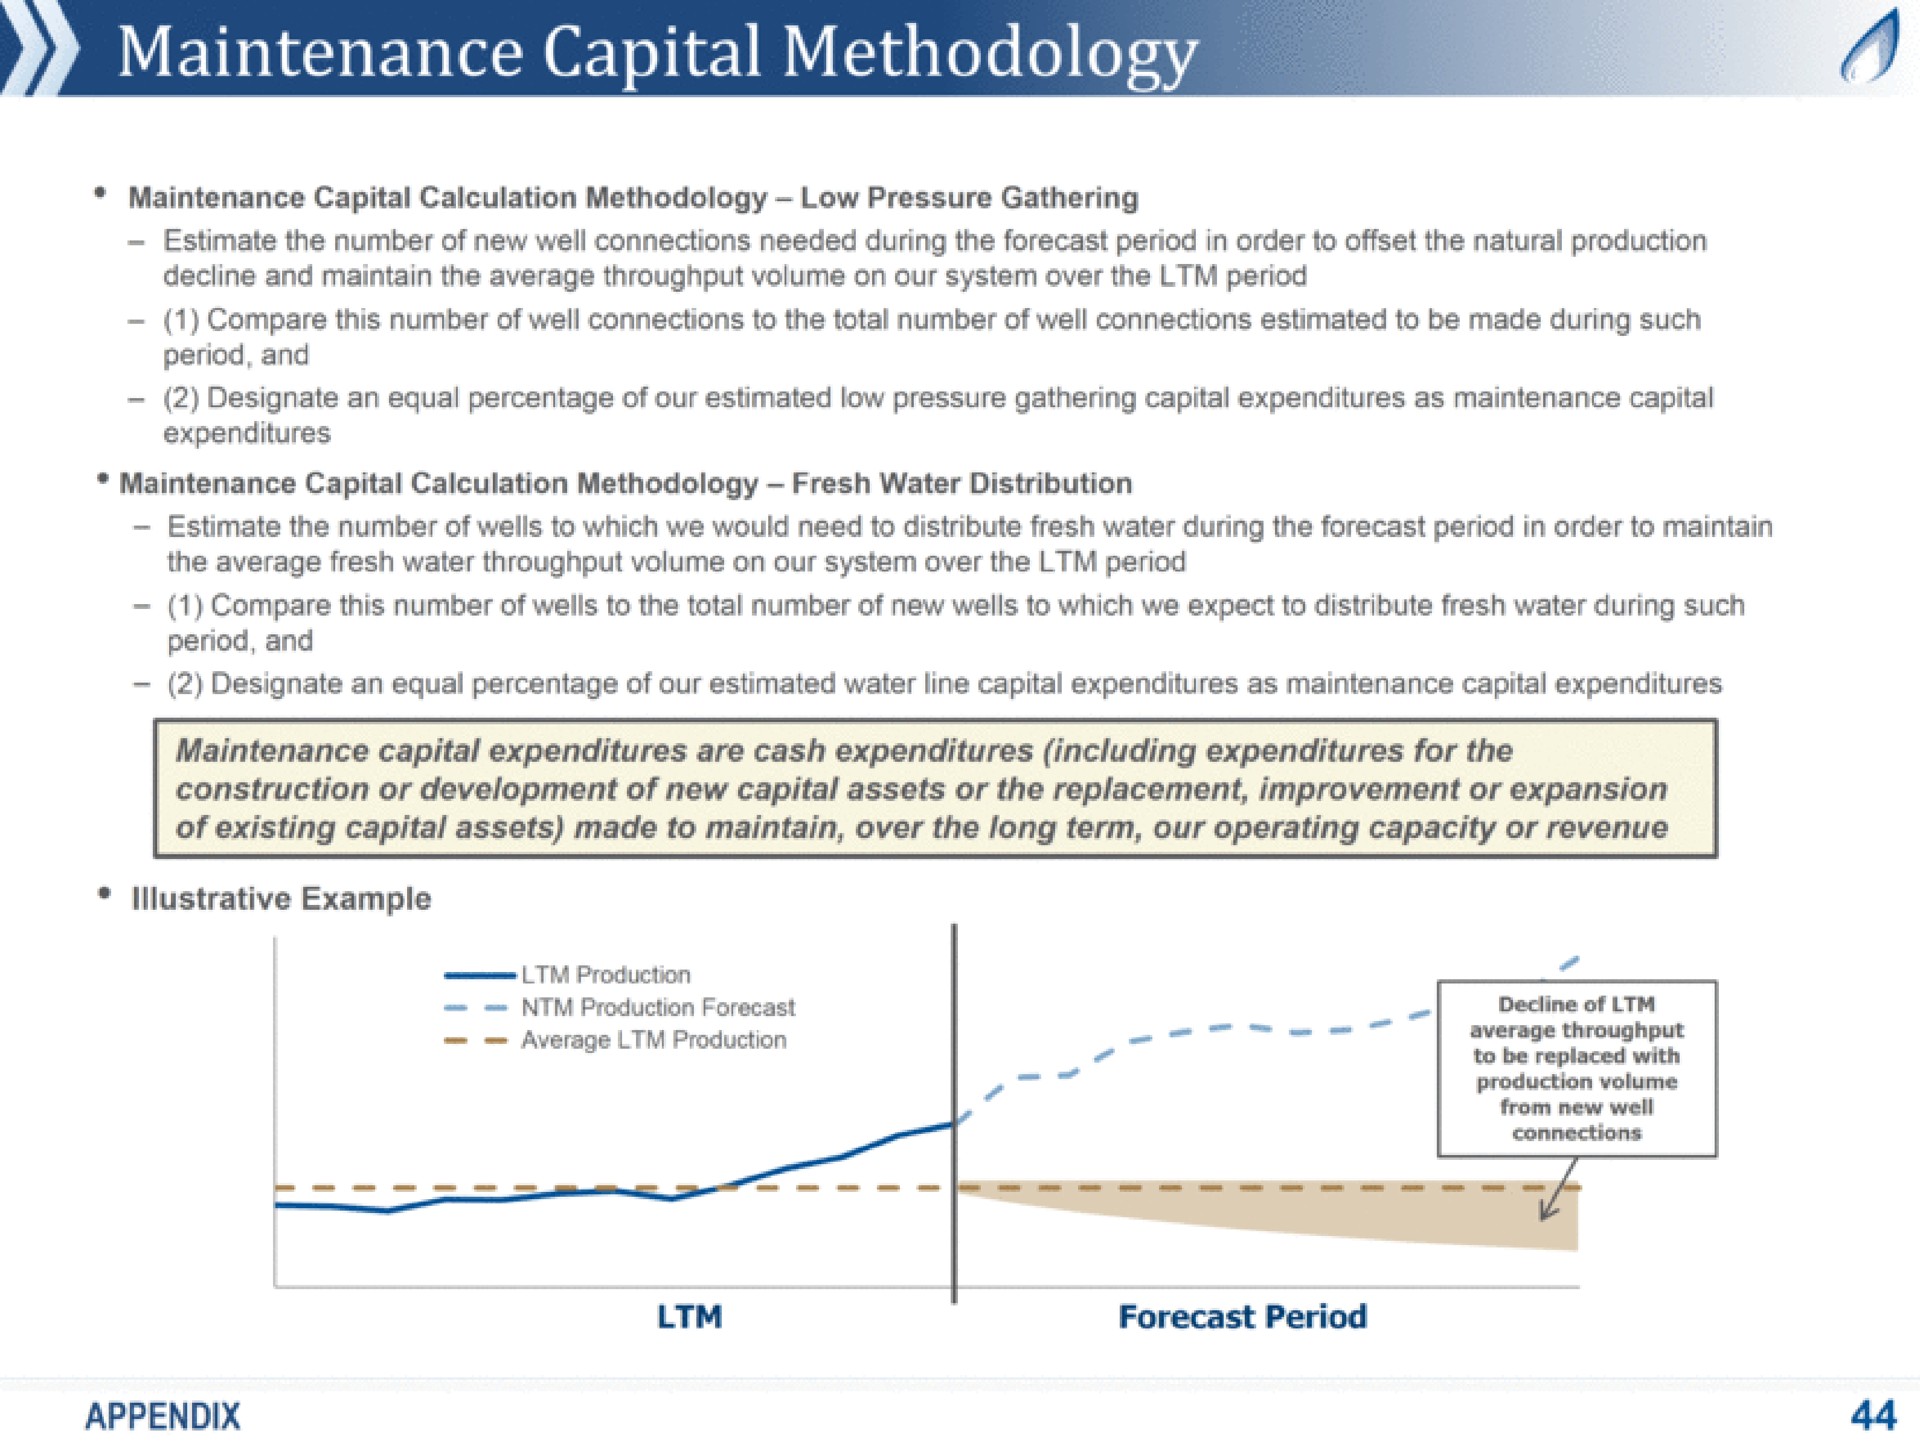 maintenance capital methodology maintenance capital calculation methodology low pressure gathering estimate the number of new well connections needed during the forecast period in order to offset the natural production decline and maintain the average throughput volume on our system over the period compare this number of well connections to the total number of well connections estimated to be made during such period and designate an equal percentage of our estimated low pressure gathering capital expenditures as maintenance capital expenditures maintenance capital calculation methodology fresh water distribution estimate the number of wells to which we would need to distribute fresh water during the forecast period in order to maintain the average fresh water throughput volume on our system over the period compare this number of wells to the total number of new wells to which we expect to distribute fresh water during such period and designate an equal percentage of our estimated water line capital expenditures as maintenance capital expenditures maintenance capital expenditures are cash expenditures including expenditures for the construction or development of new capital assets or the replacement improvement or expansion of existing capital assets made to maintain over the long term our operating capacity or revenue example aes production production forecast production connections decline of average throughput to be replaced with production volume from new well average i forecast period appendix | Antero Midstream Partners